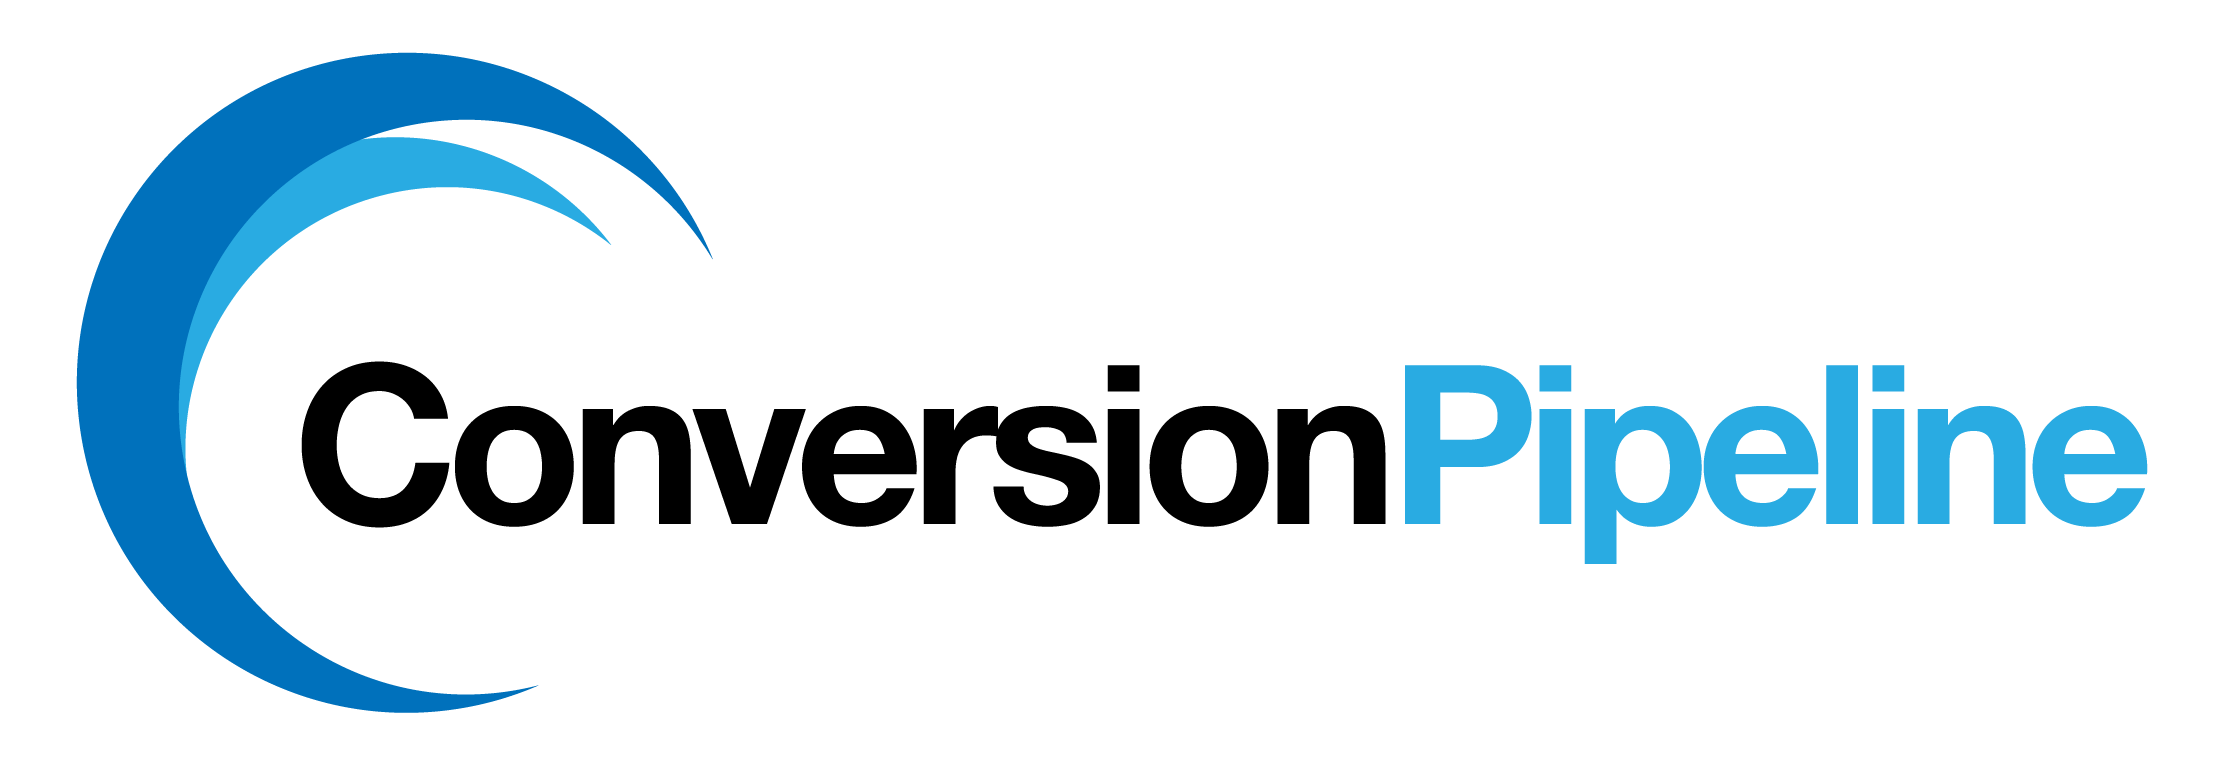 Conversion Pipeline Logos - Both versions-02.png